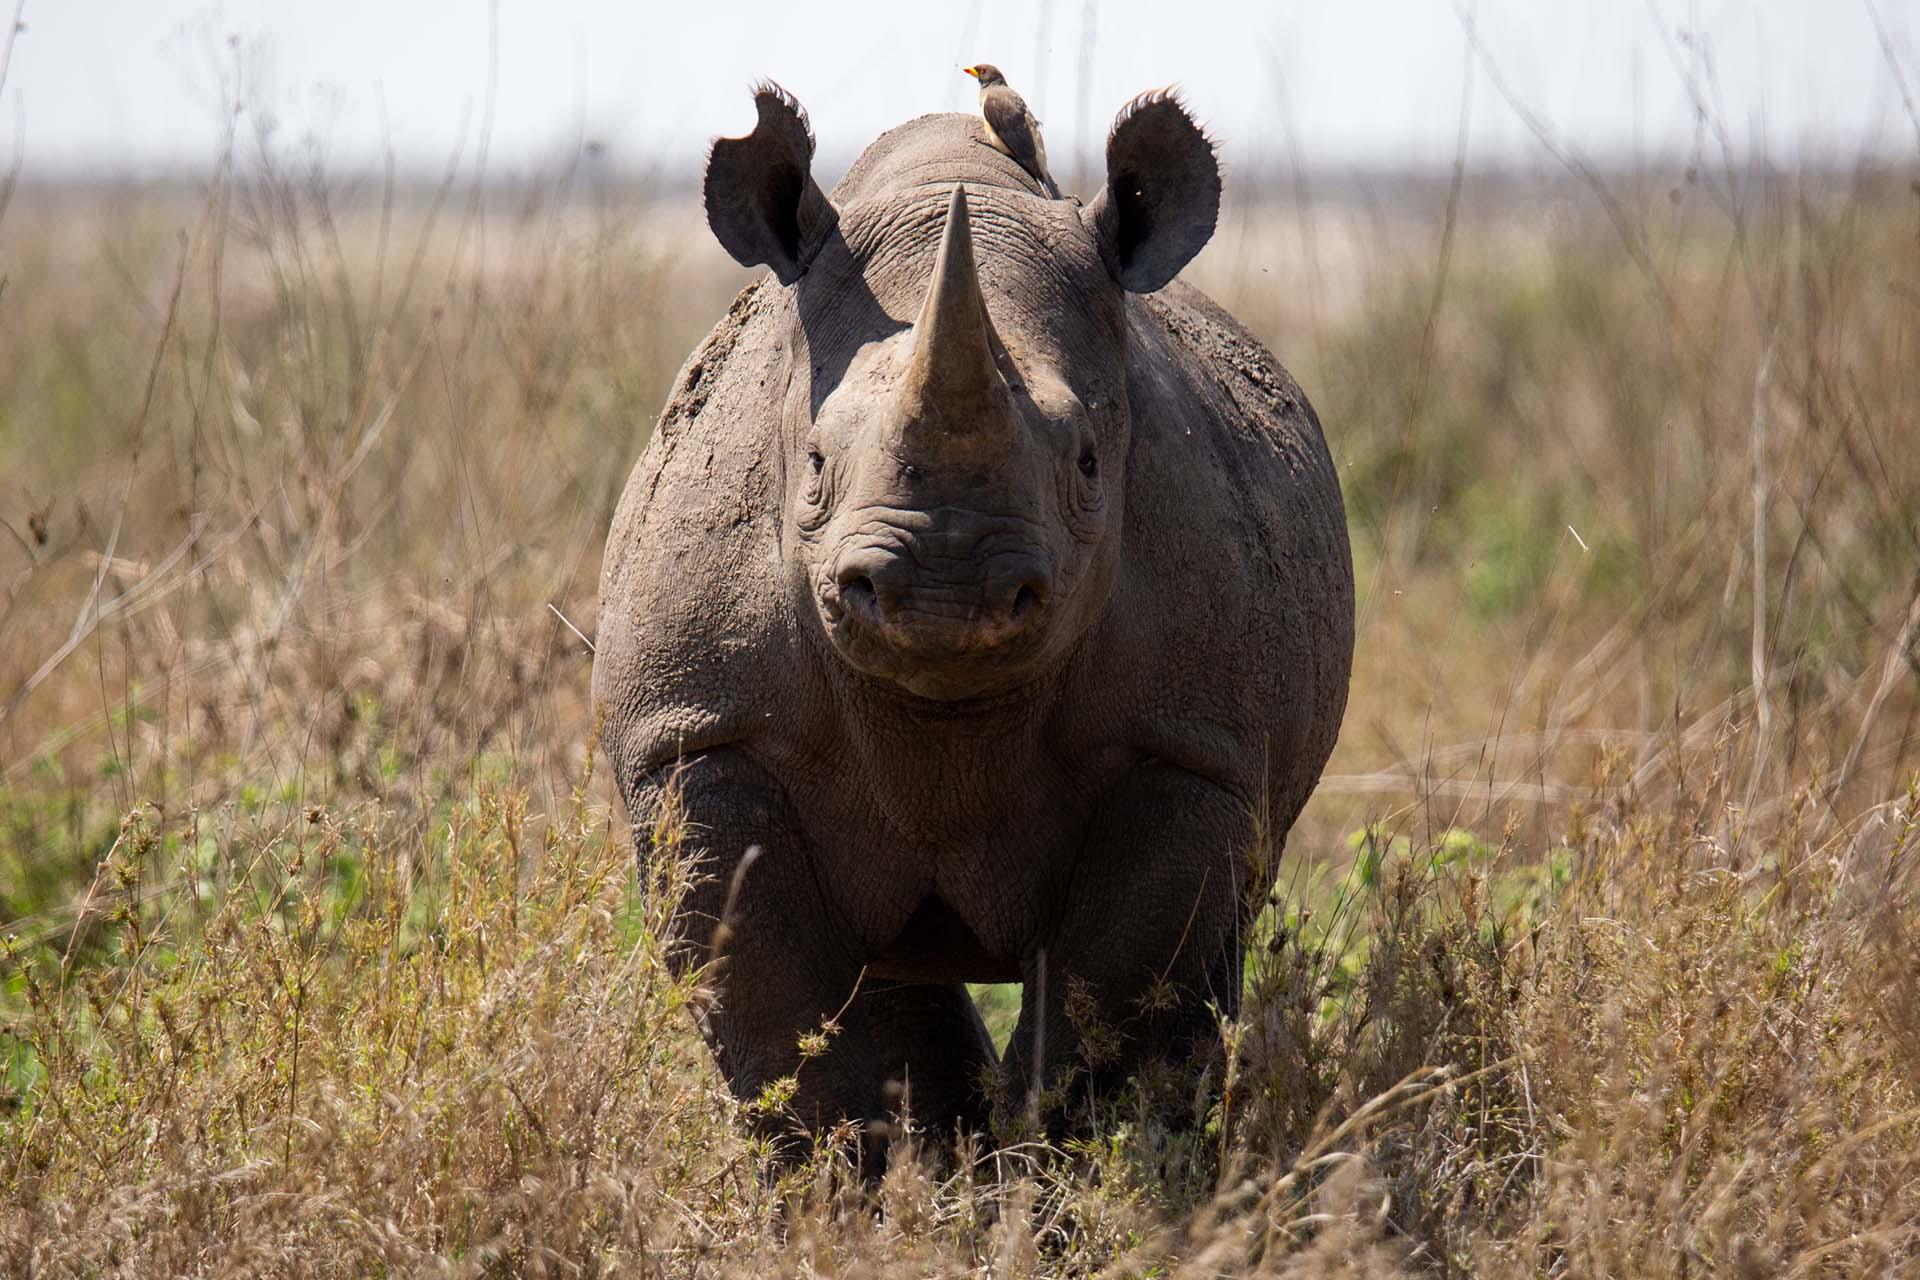 it is the female rhino named Lina. Malale named the rhino after his daughter. He has known her since she was born.